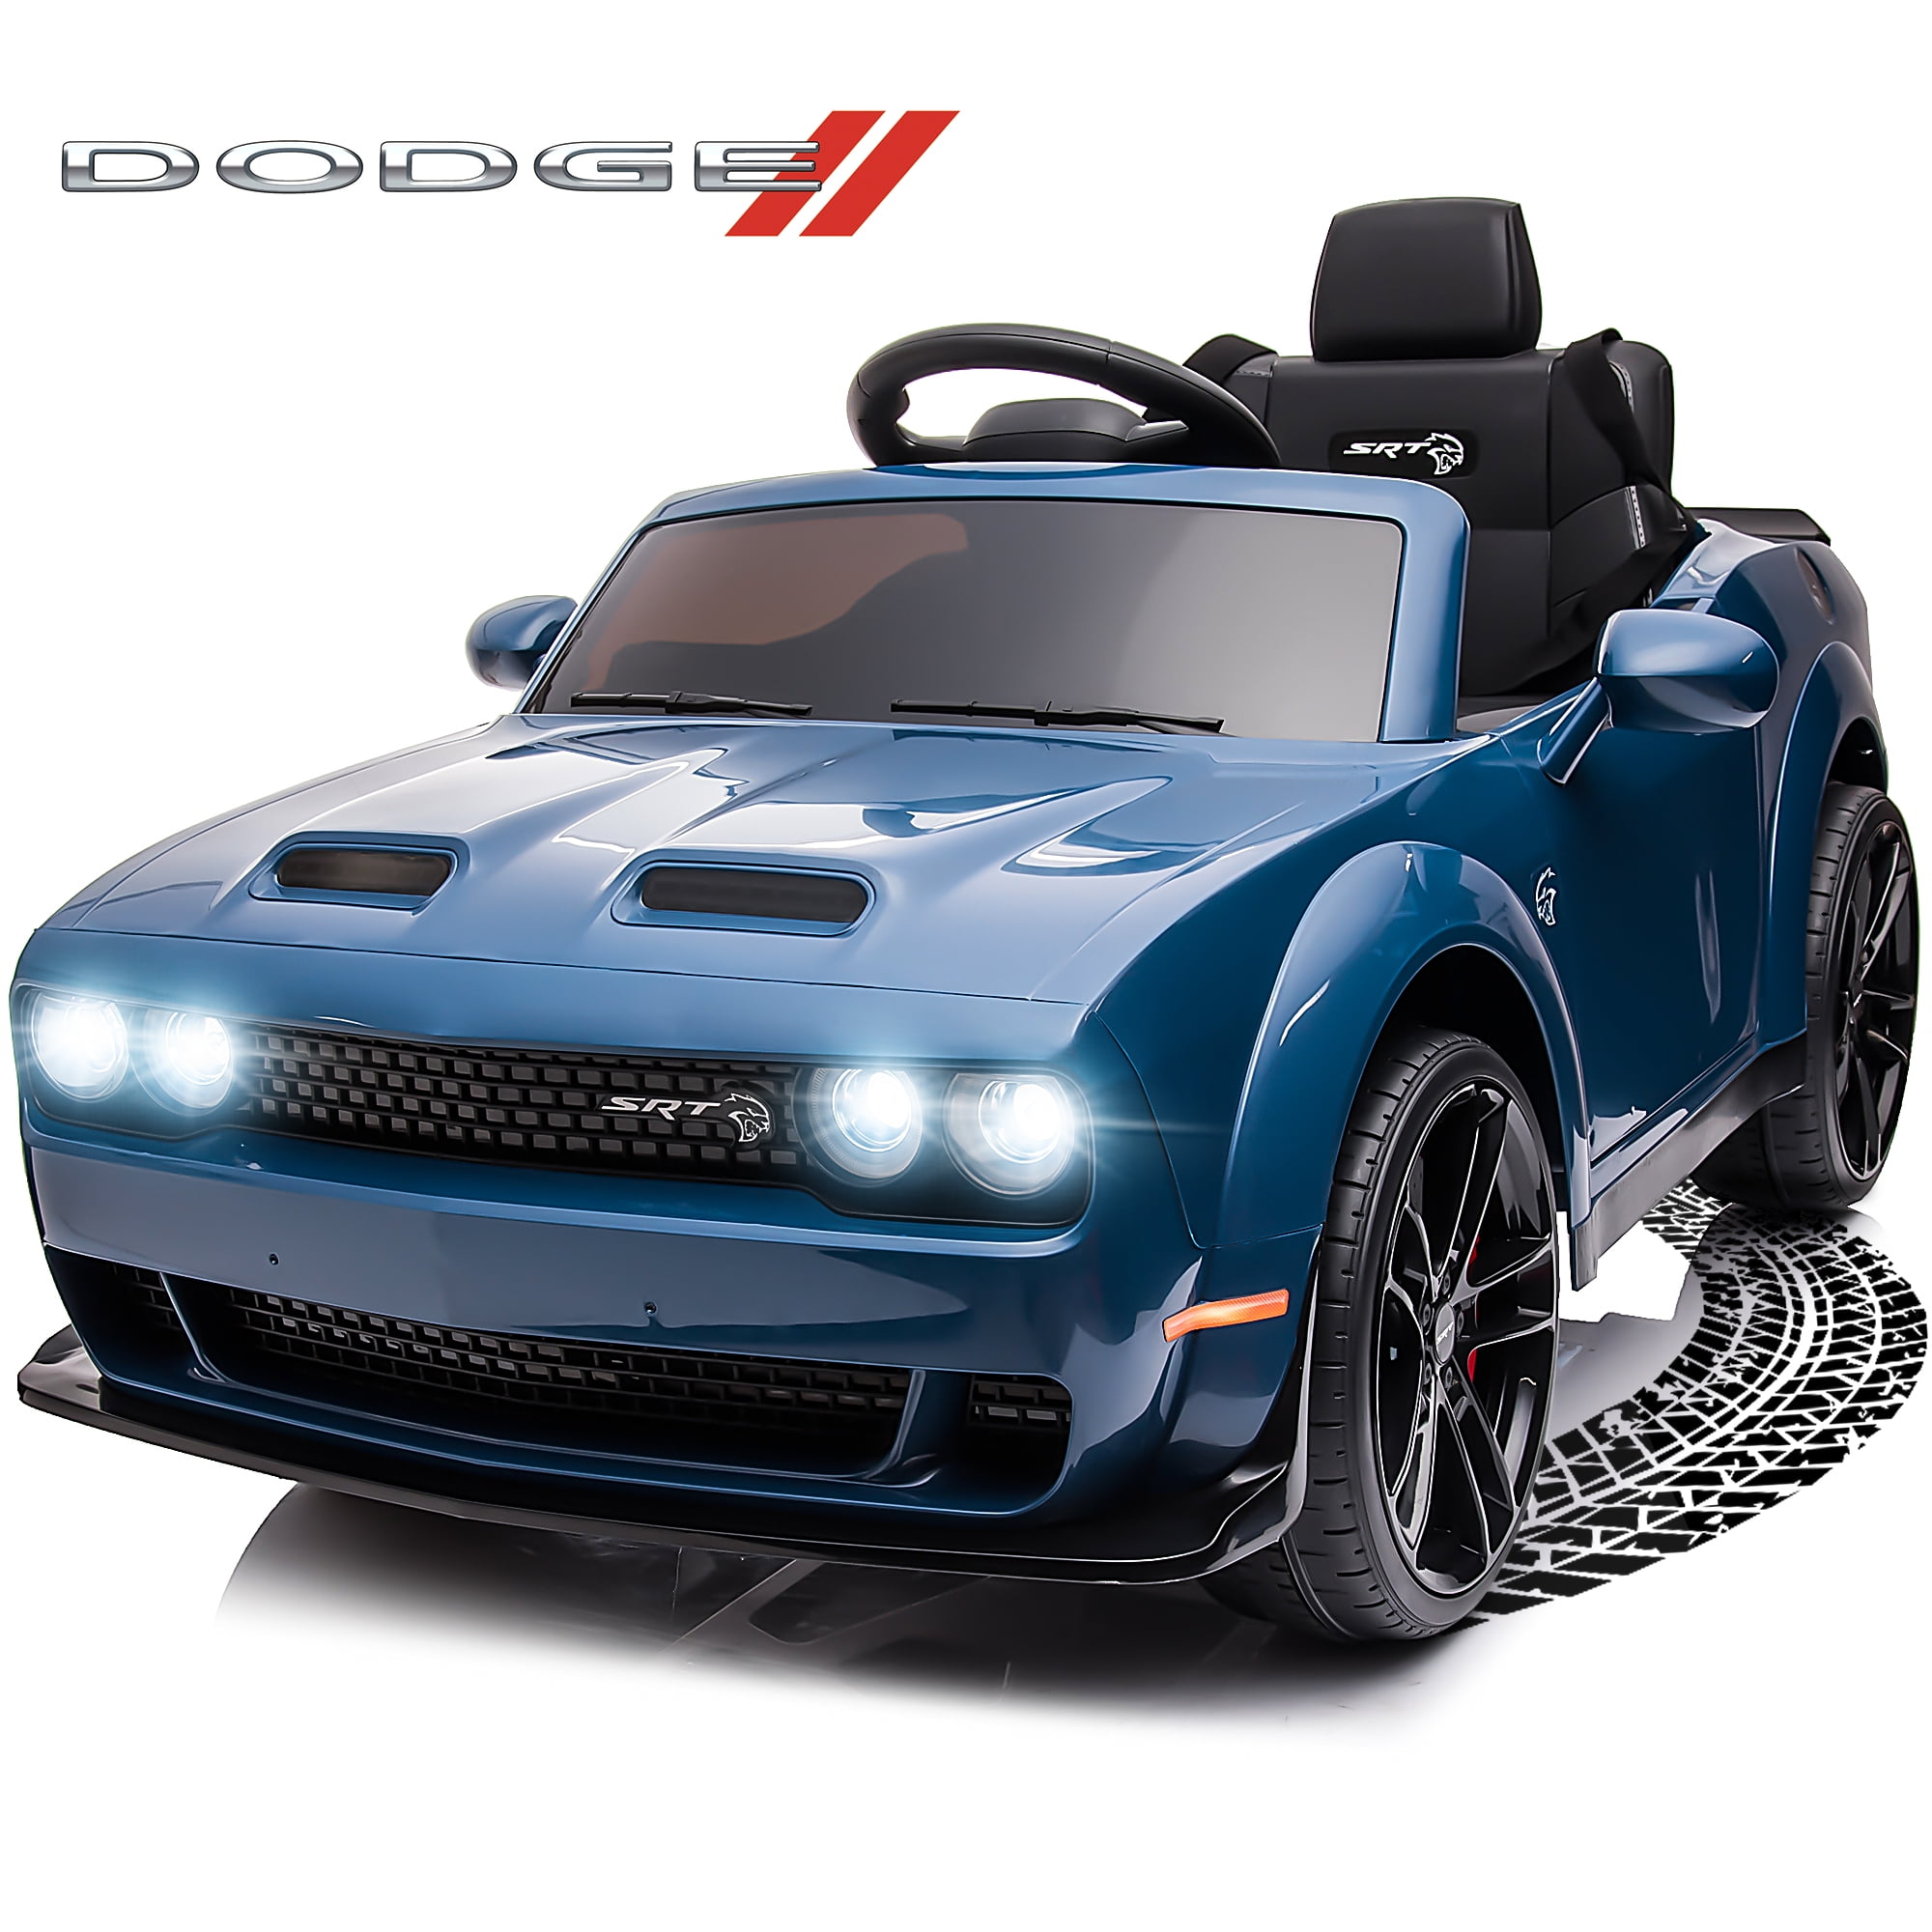 Dodge Challenger 12 V Powered Ride On Car with Remote Control, SRT Hellcat  Toys for Kids, Blue 